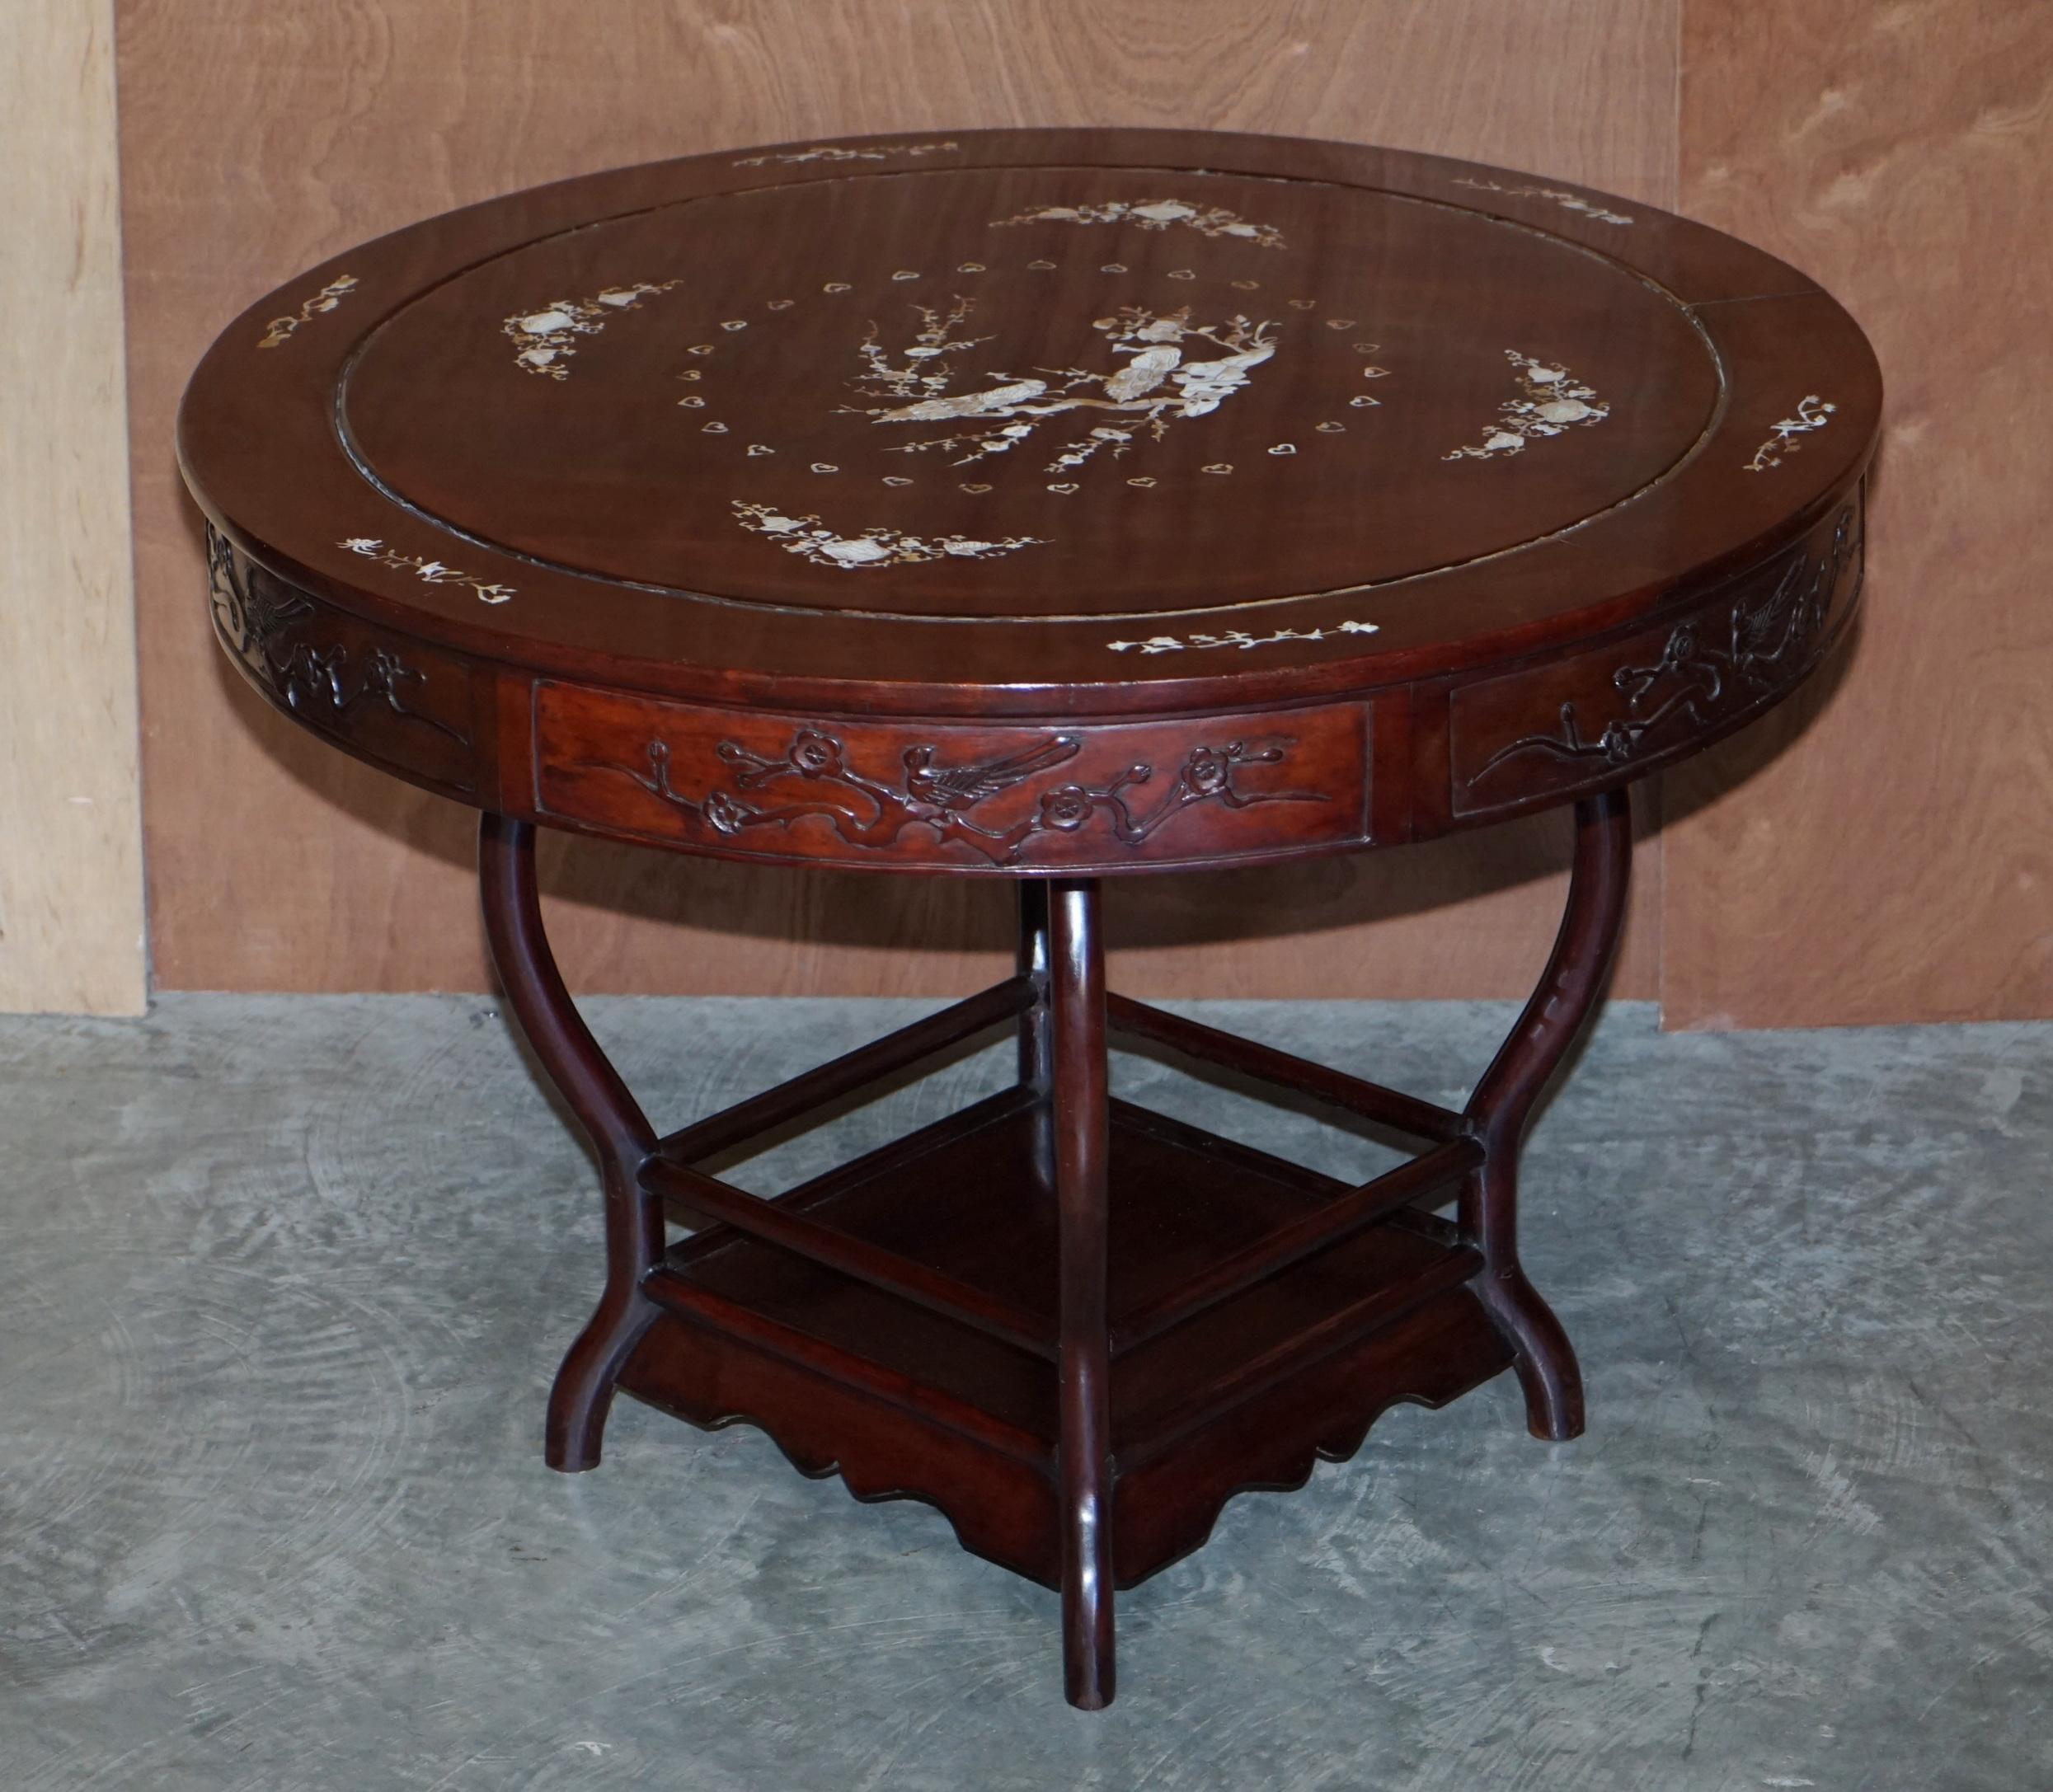 A very good looking and well made suite, the table is rosewood with mother of pearl inlay, the central section has peacocks which symbolised dignity and beauty and was favoured throughout the Republic period. The peacocks are surrounded by hearts